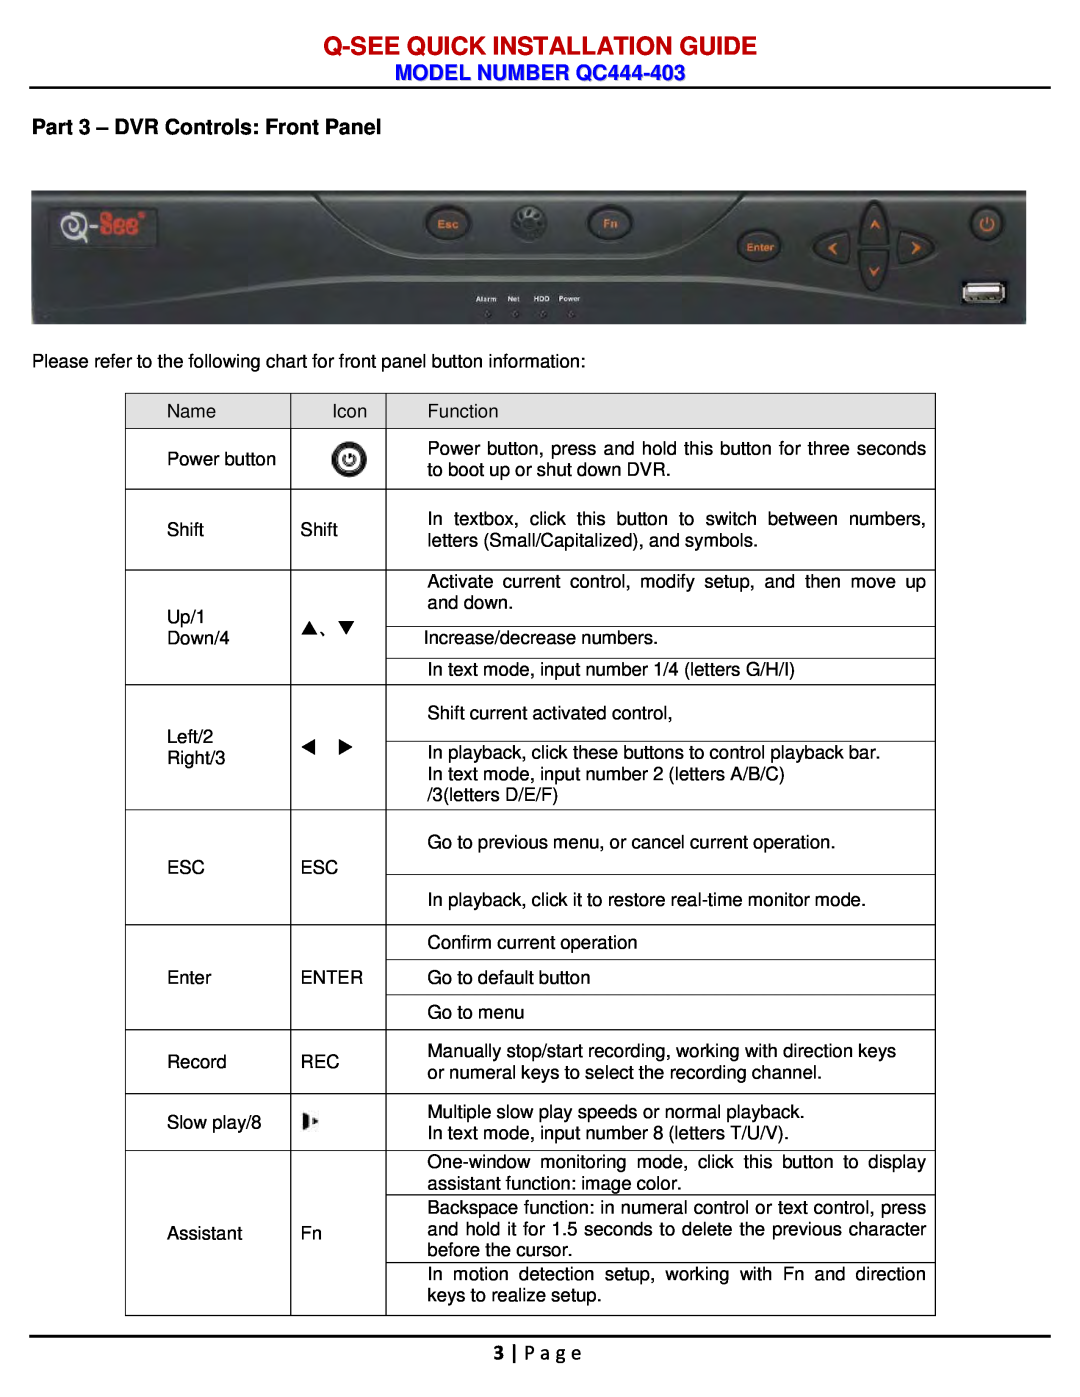 Q-See manual Part 3 - DVR Controls Front Panel, P a g e, Q-See Quick Installation Guide, MODEL NUMBER QC444-403 